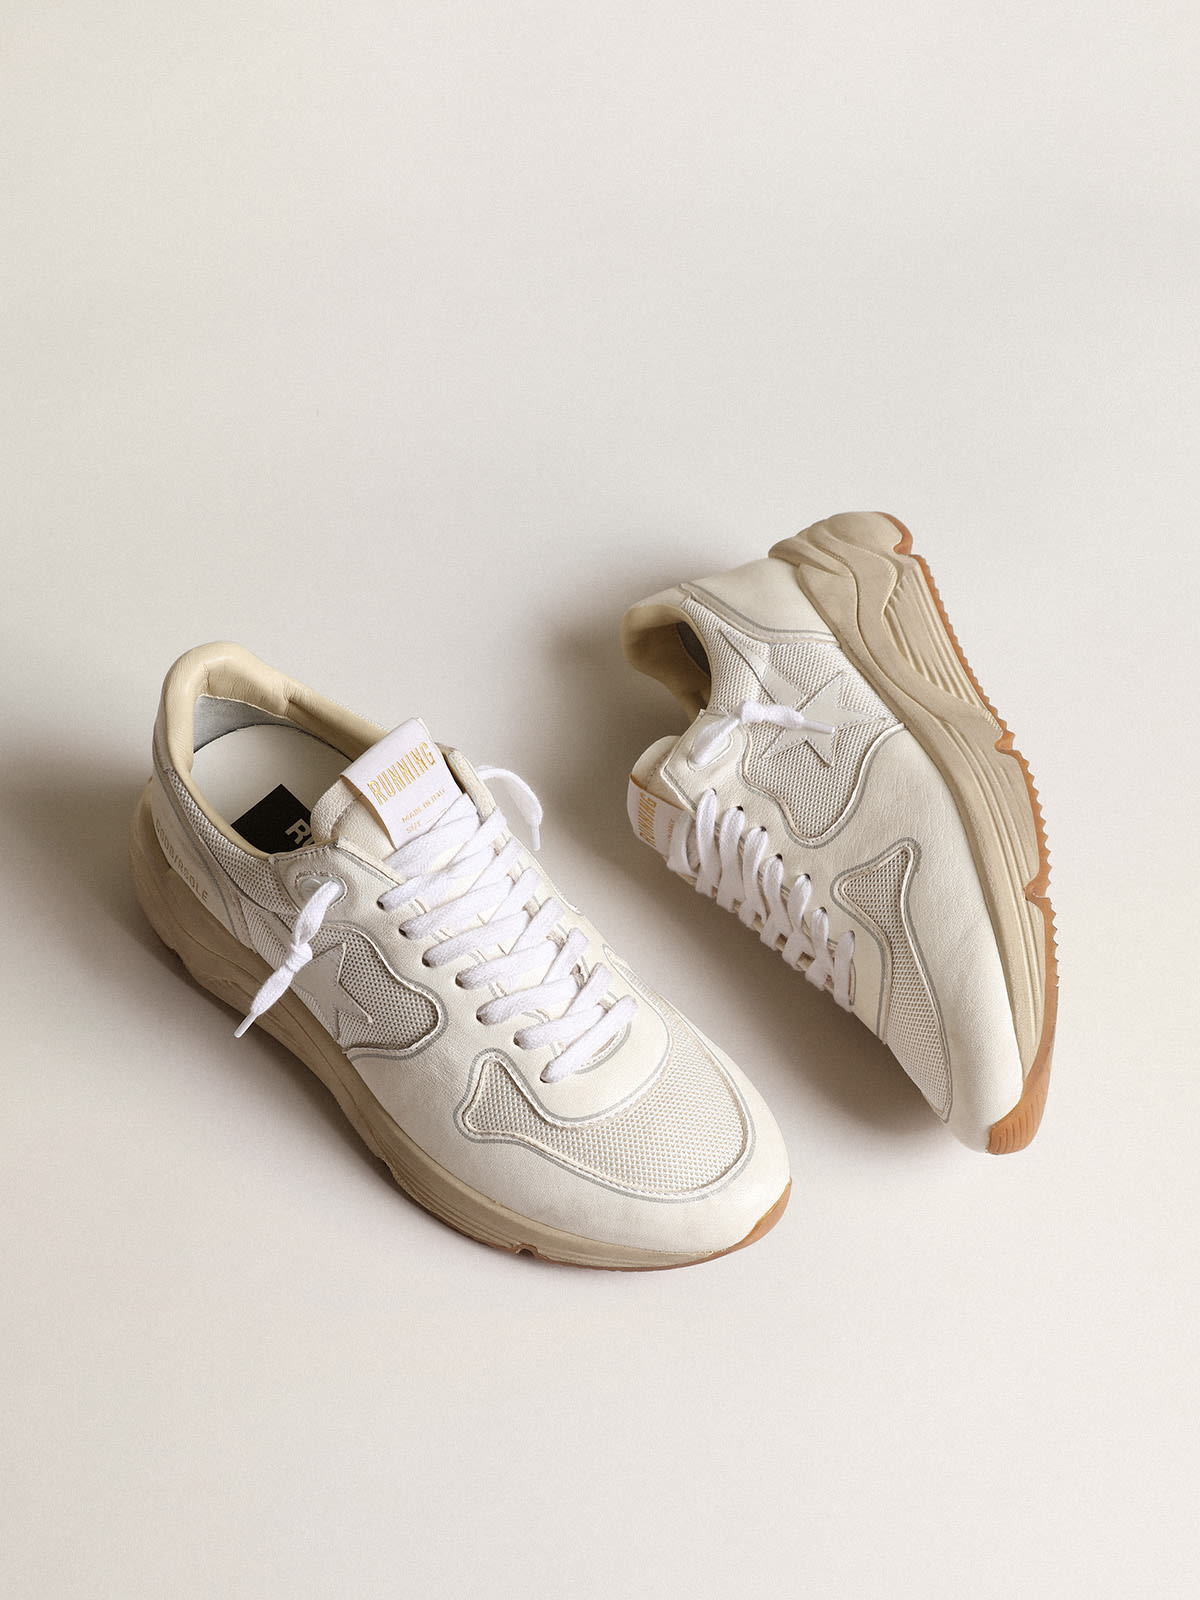 Golden Goose - Women’s Running sole sneakers in optical-white mesh and nappa leather with white leather star in 